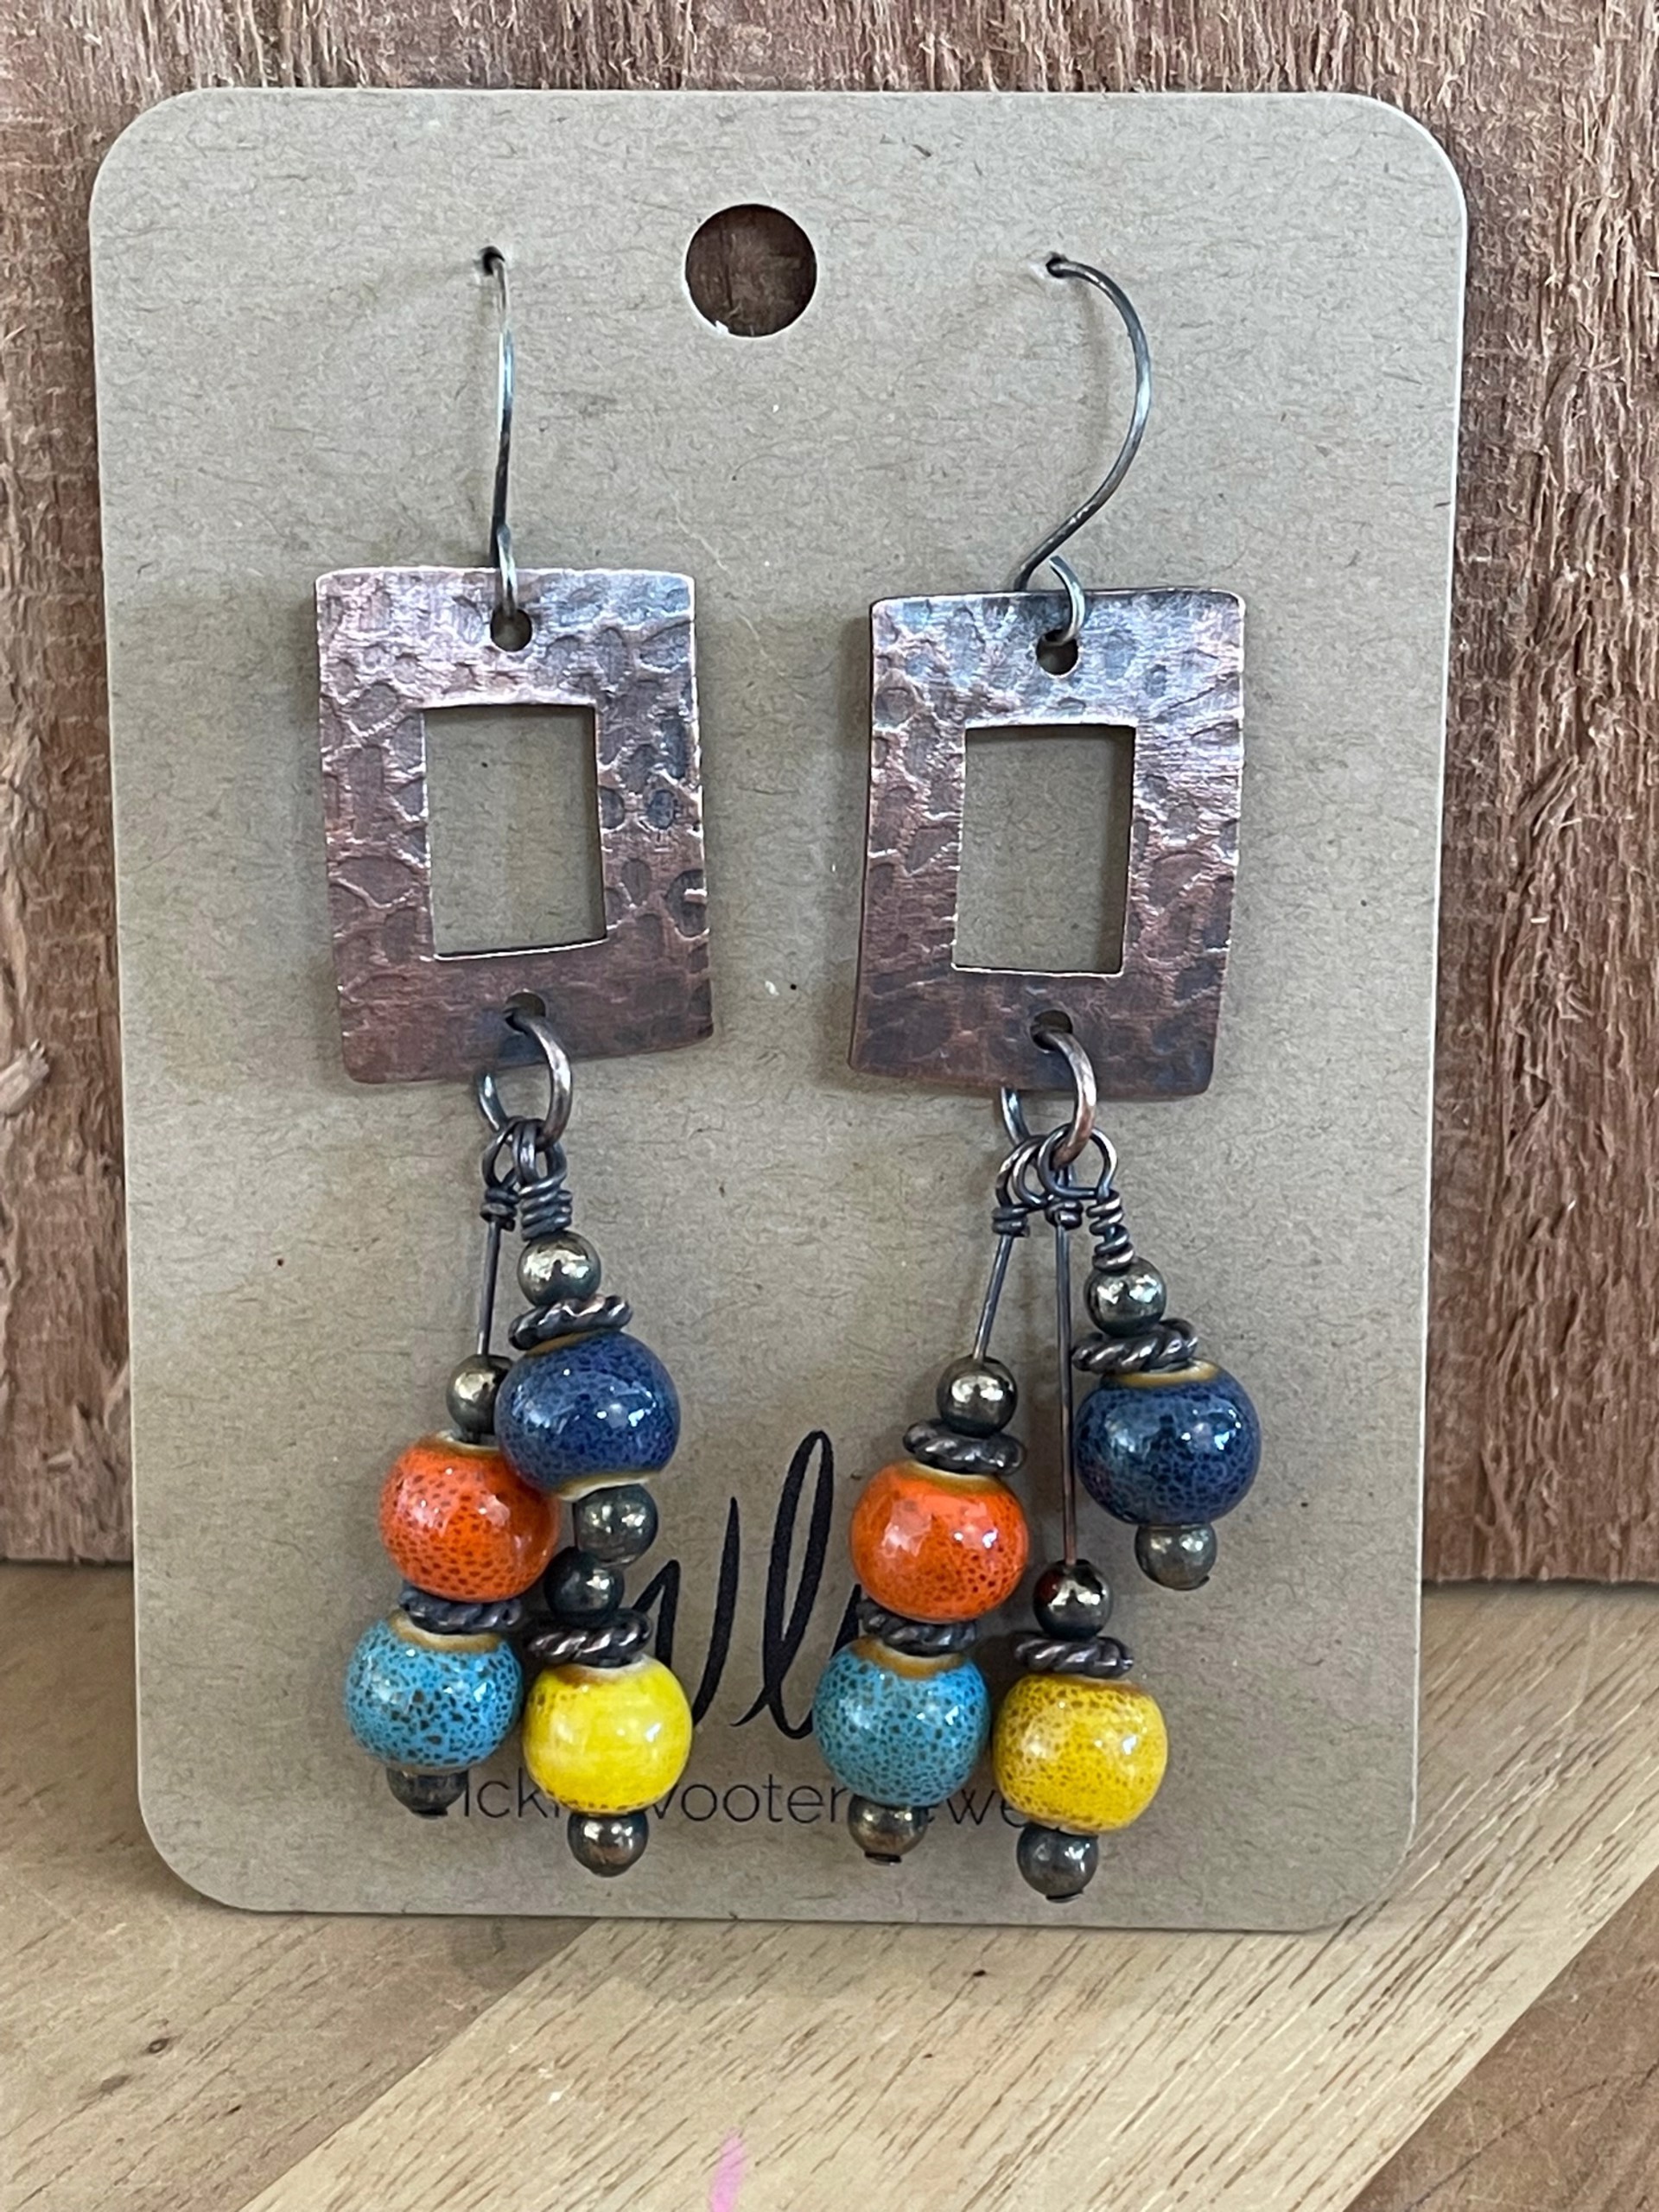 100-20 Copper with Beads Earrings by Vickie Wooten